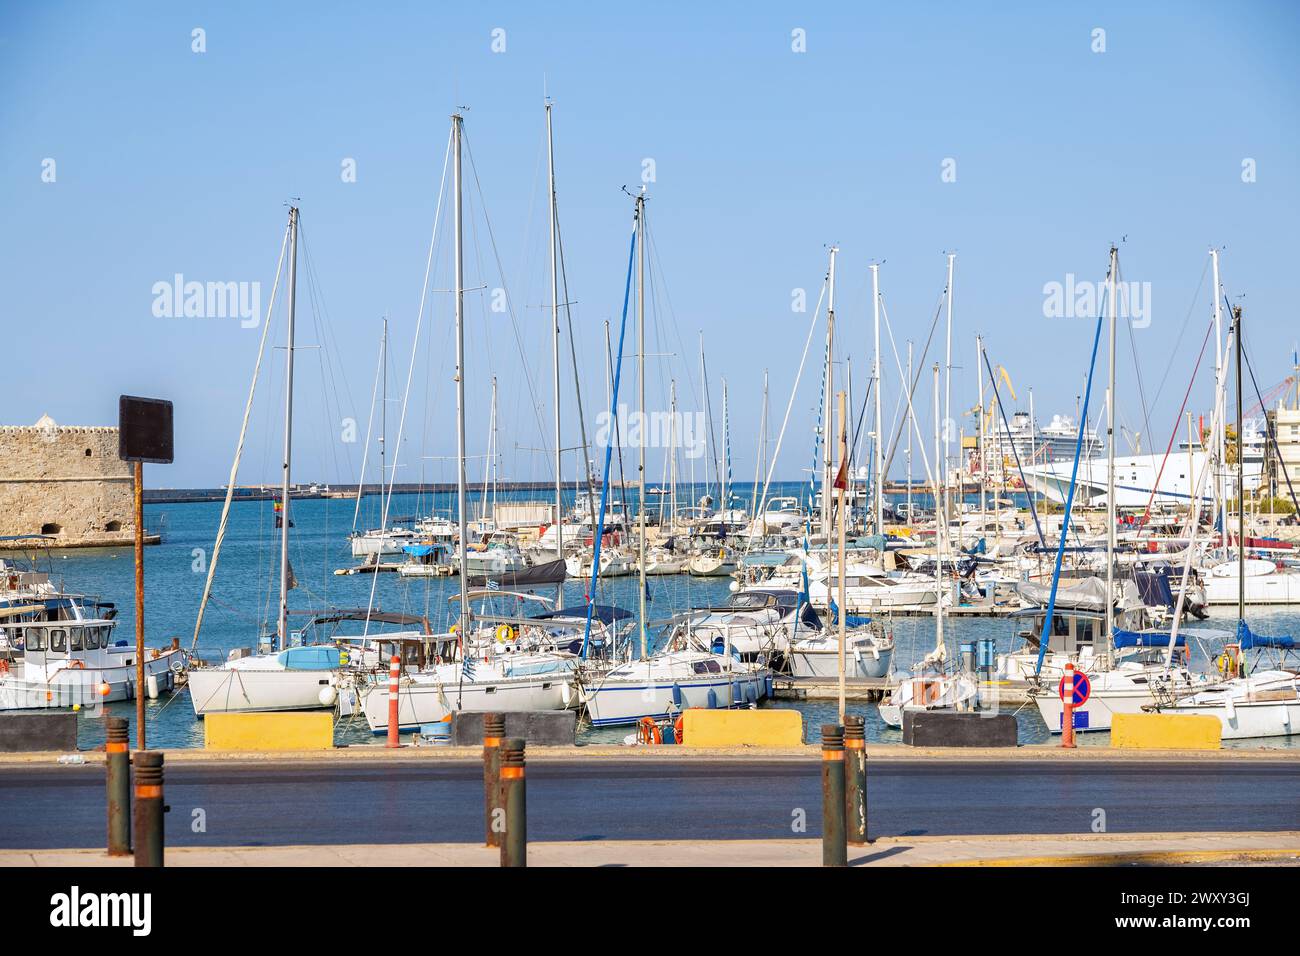 Crete island, destination Greece. Moored ship and boat with mast at Heraklion old Venetian harbor, calm sea water, blue sky background. Stock Photo